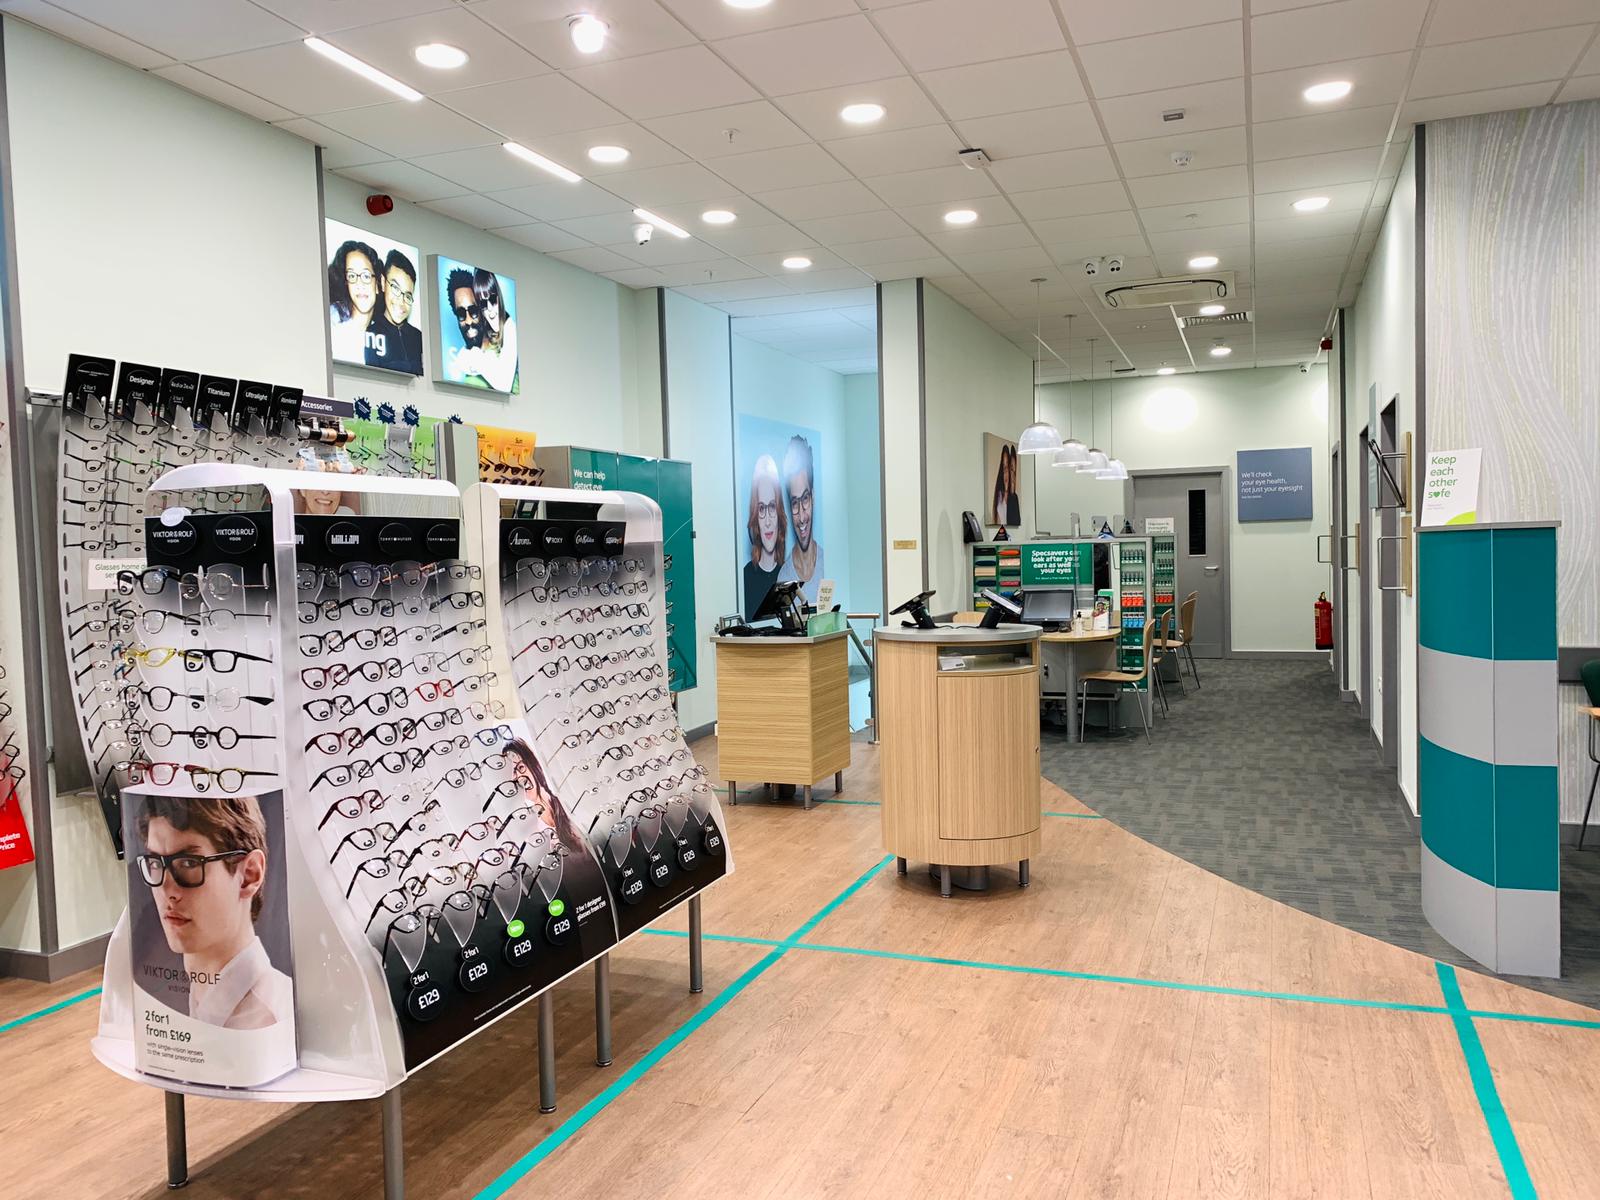 Specsavers Opticians and Audiologists - Hammersmith Hammersmith 020 8748 3233